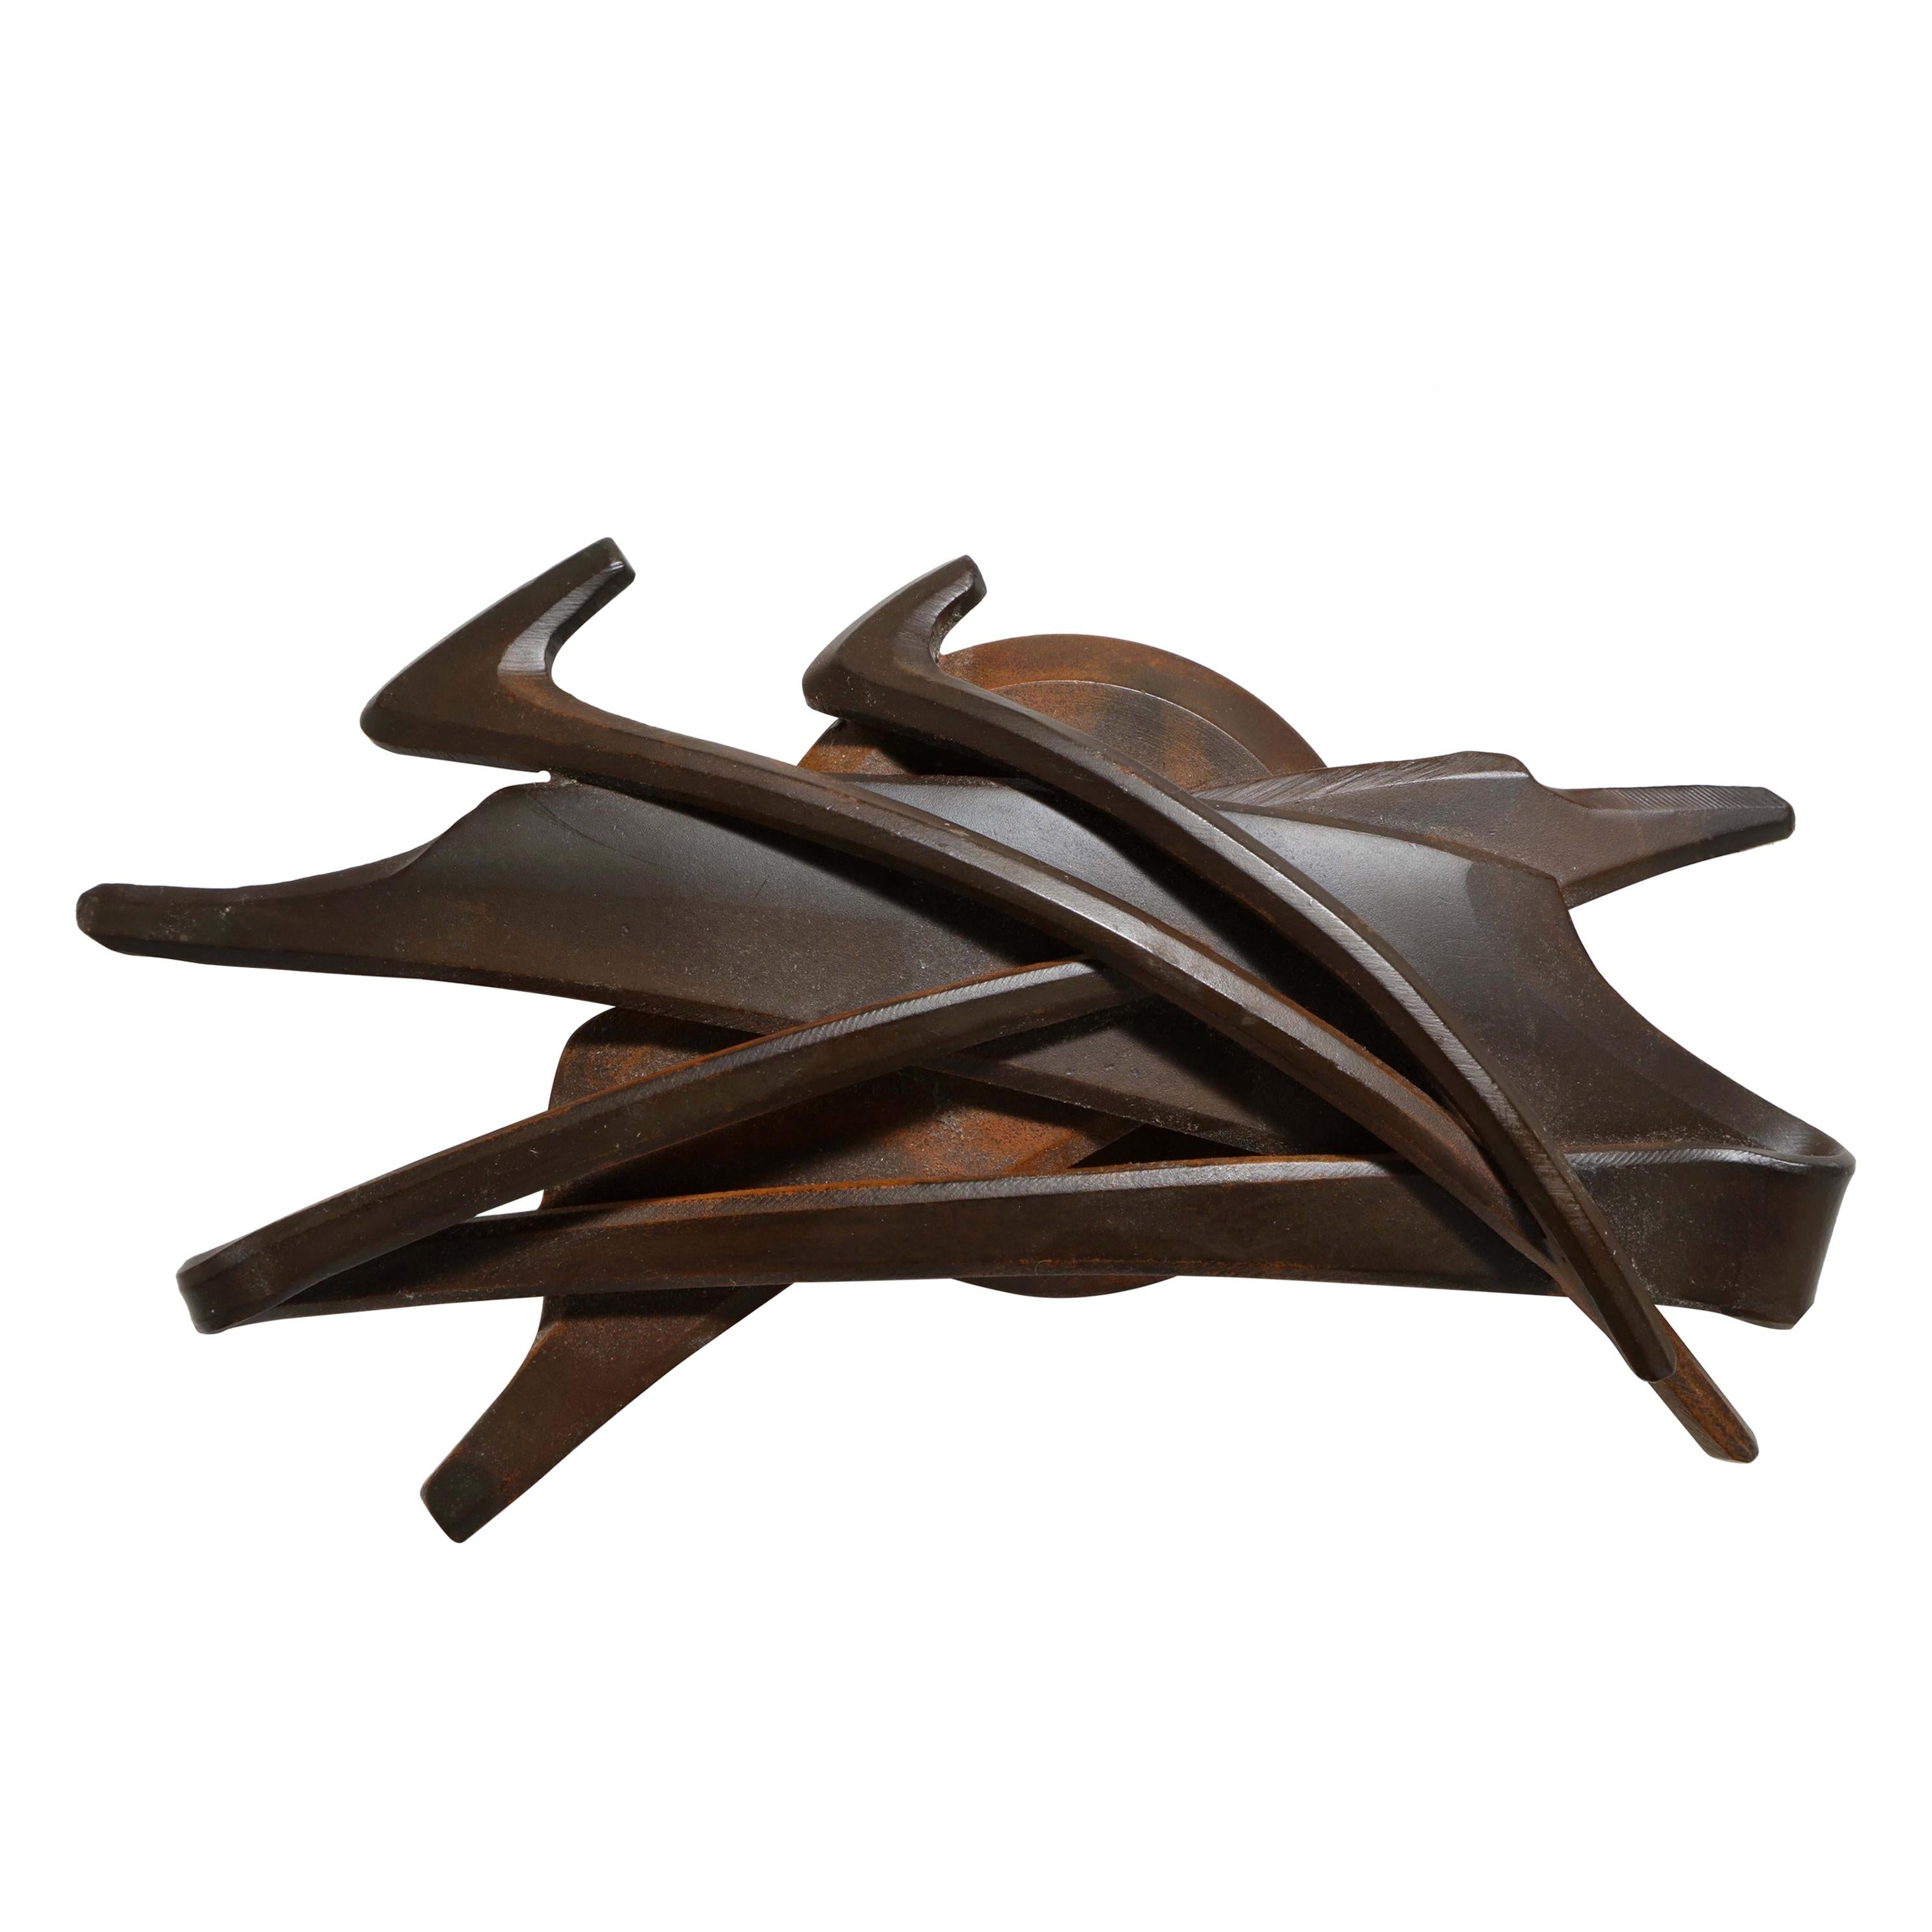 Albert Paley 1994 "Medallion" Paperweight in Blackened Steel with Bronzed Patina For Sale